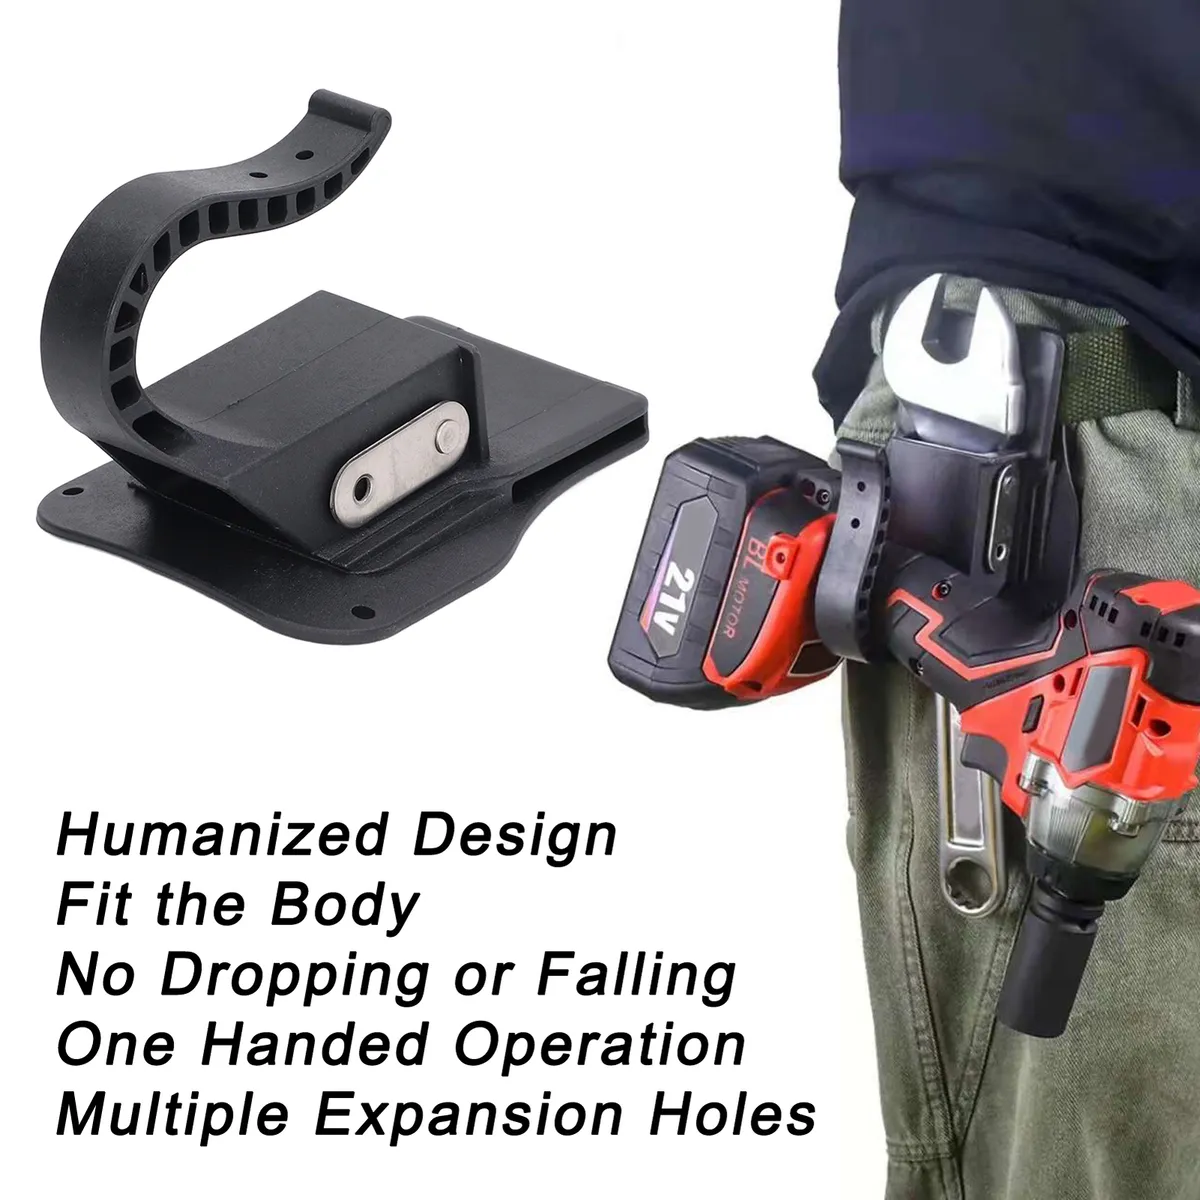 4. How Holster Material Influences Concealment and Printing